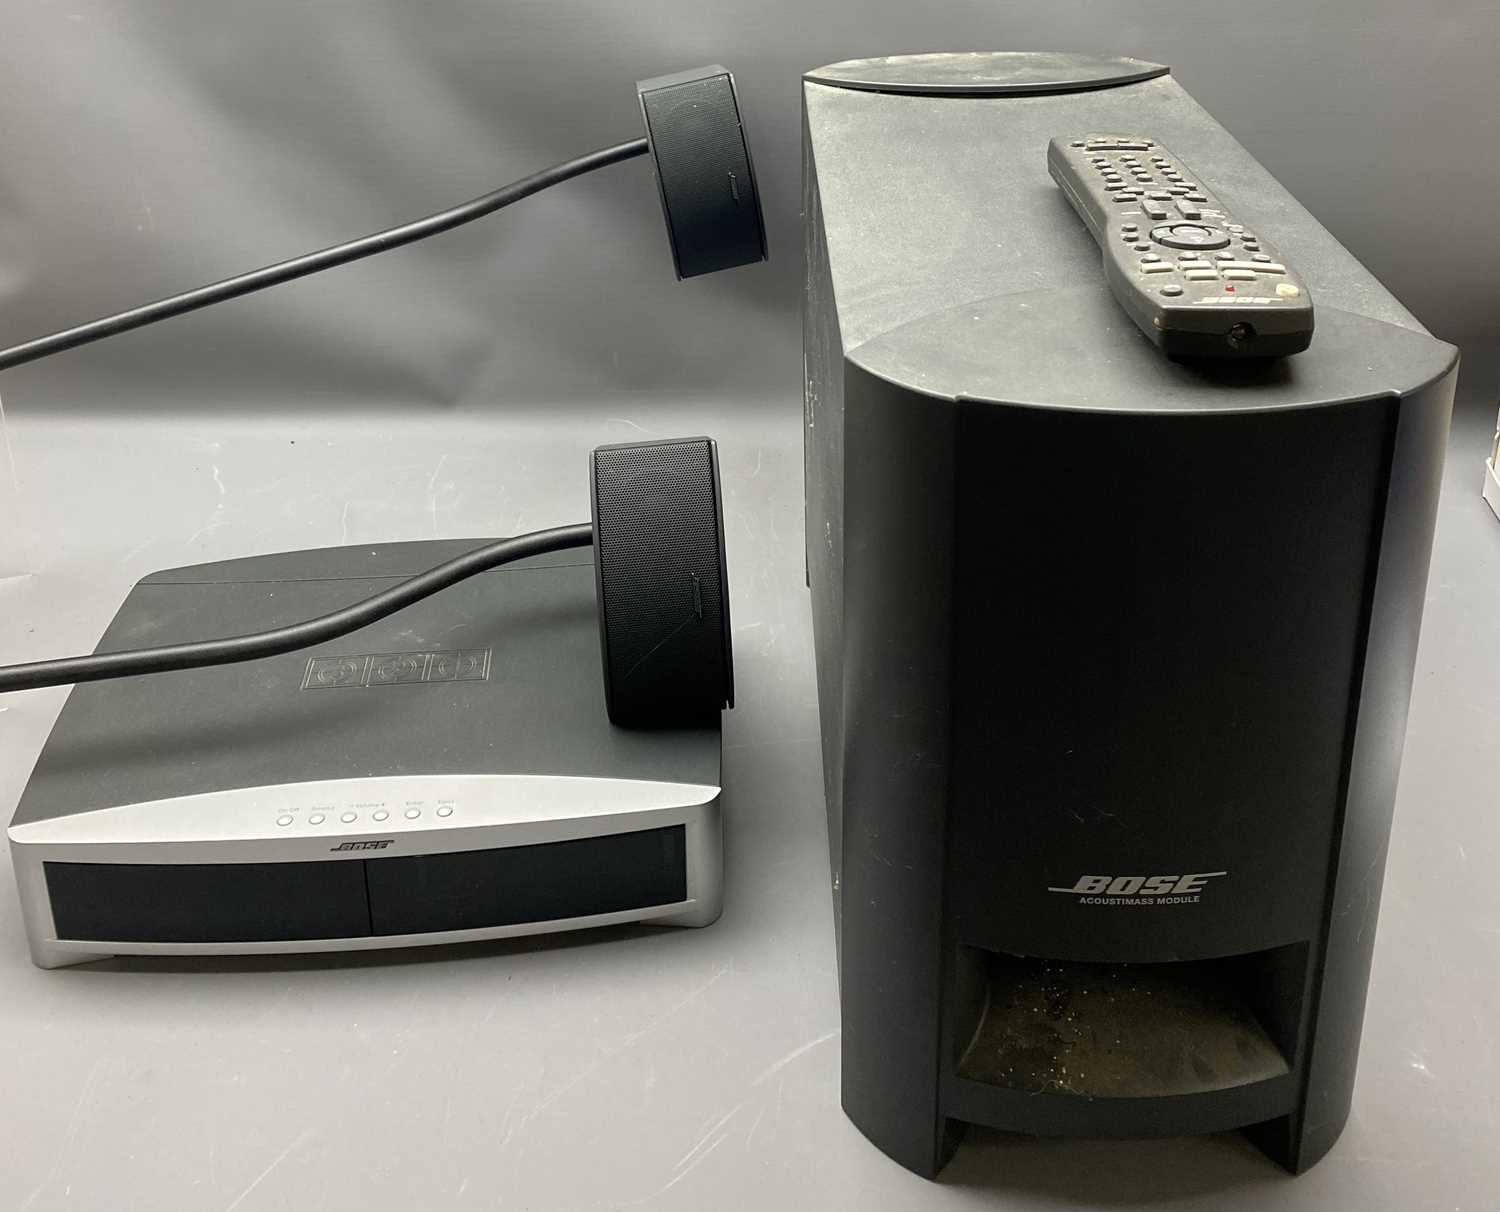 BOSE MODEL AV3-2-1-II MEDIA CENTRE, an acoustimass module and two small Bose speakers on stands